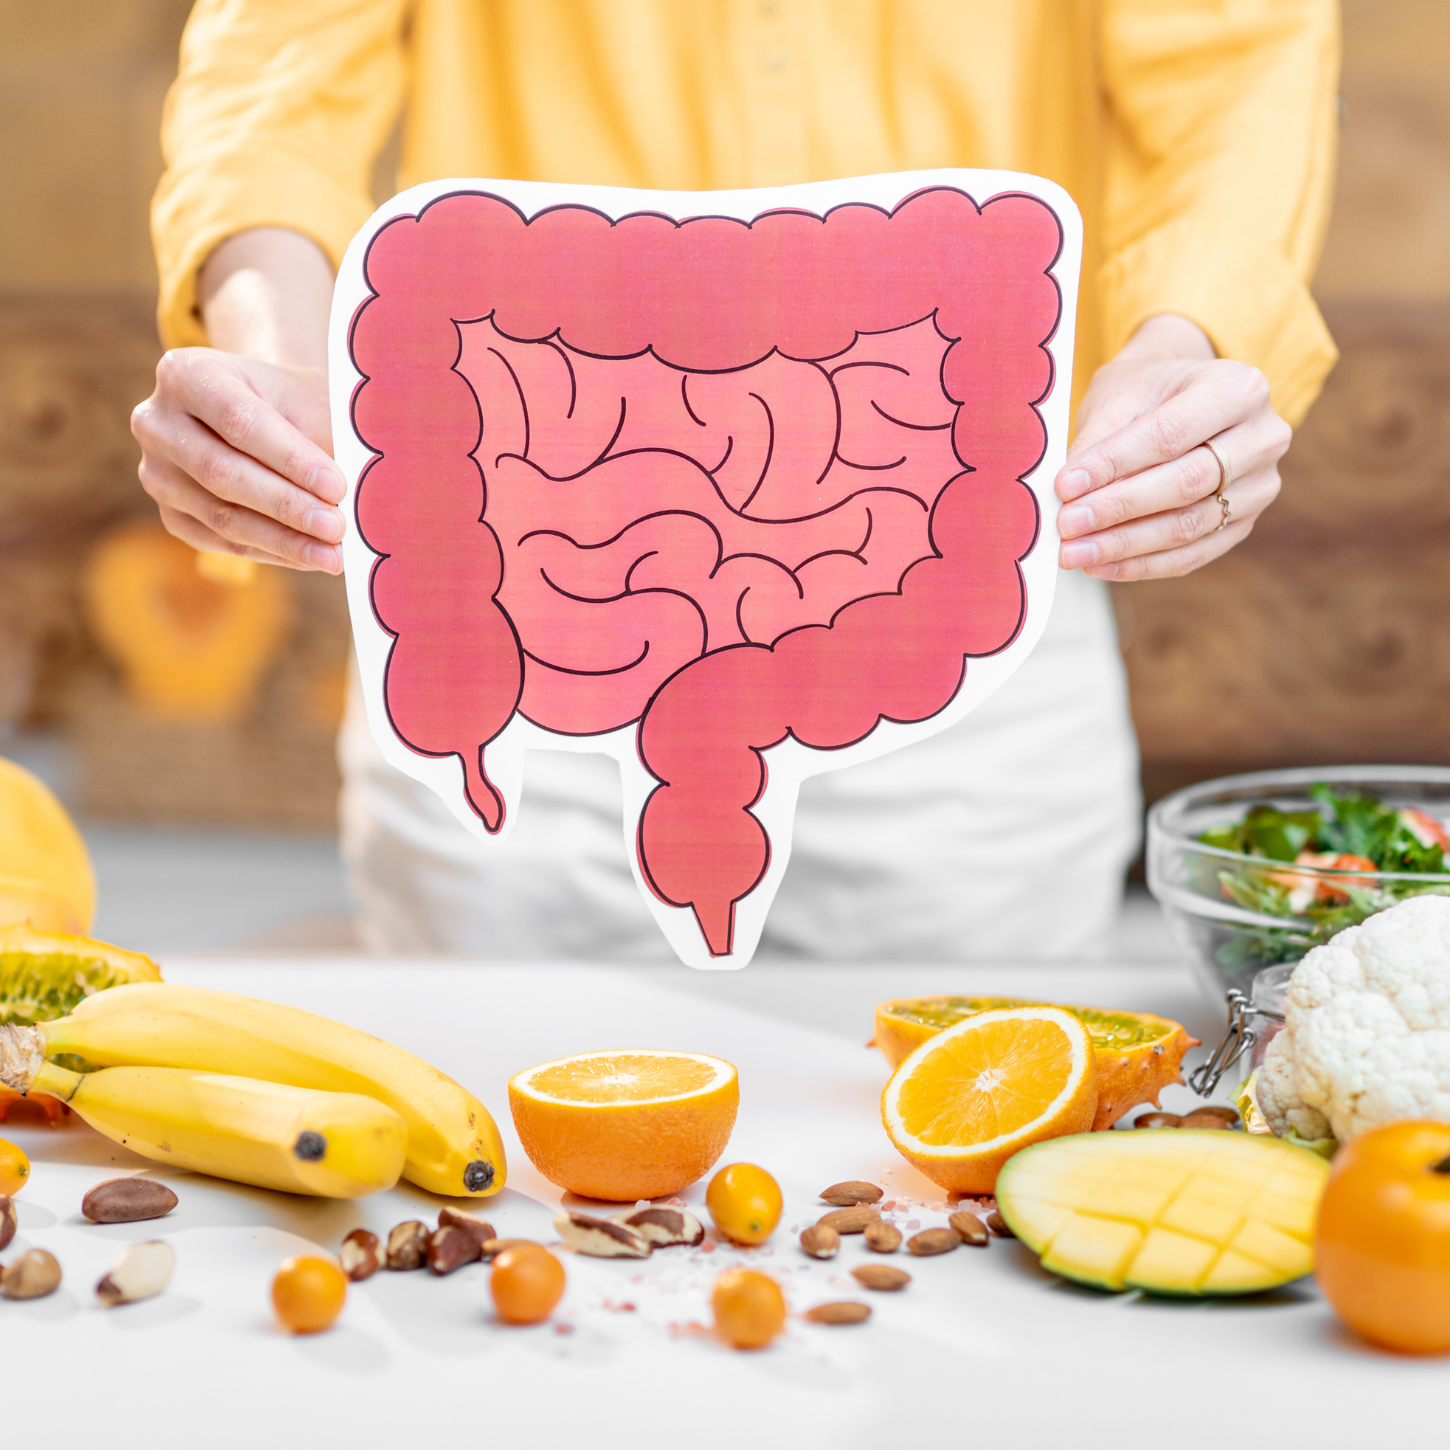 What Your Bowel Habits Say About You